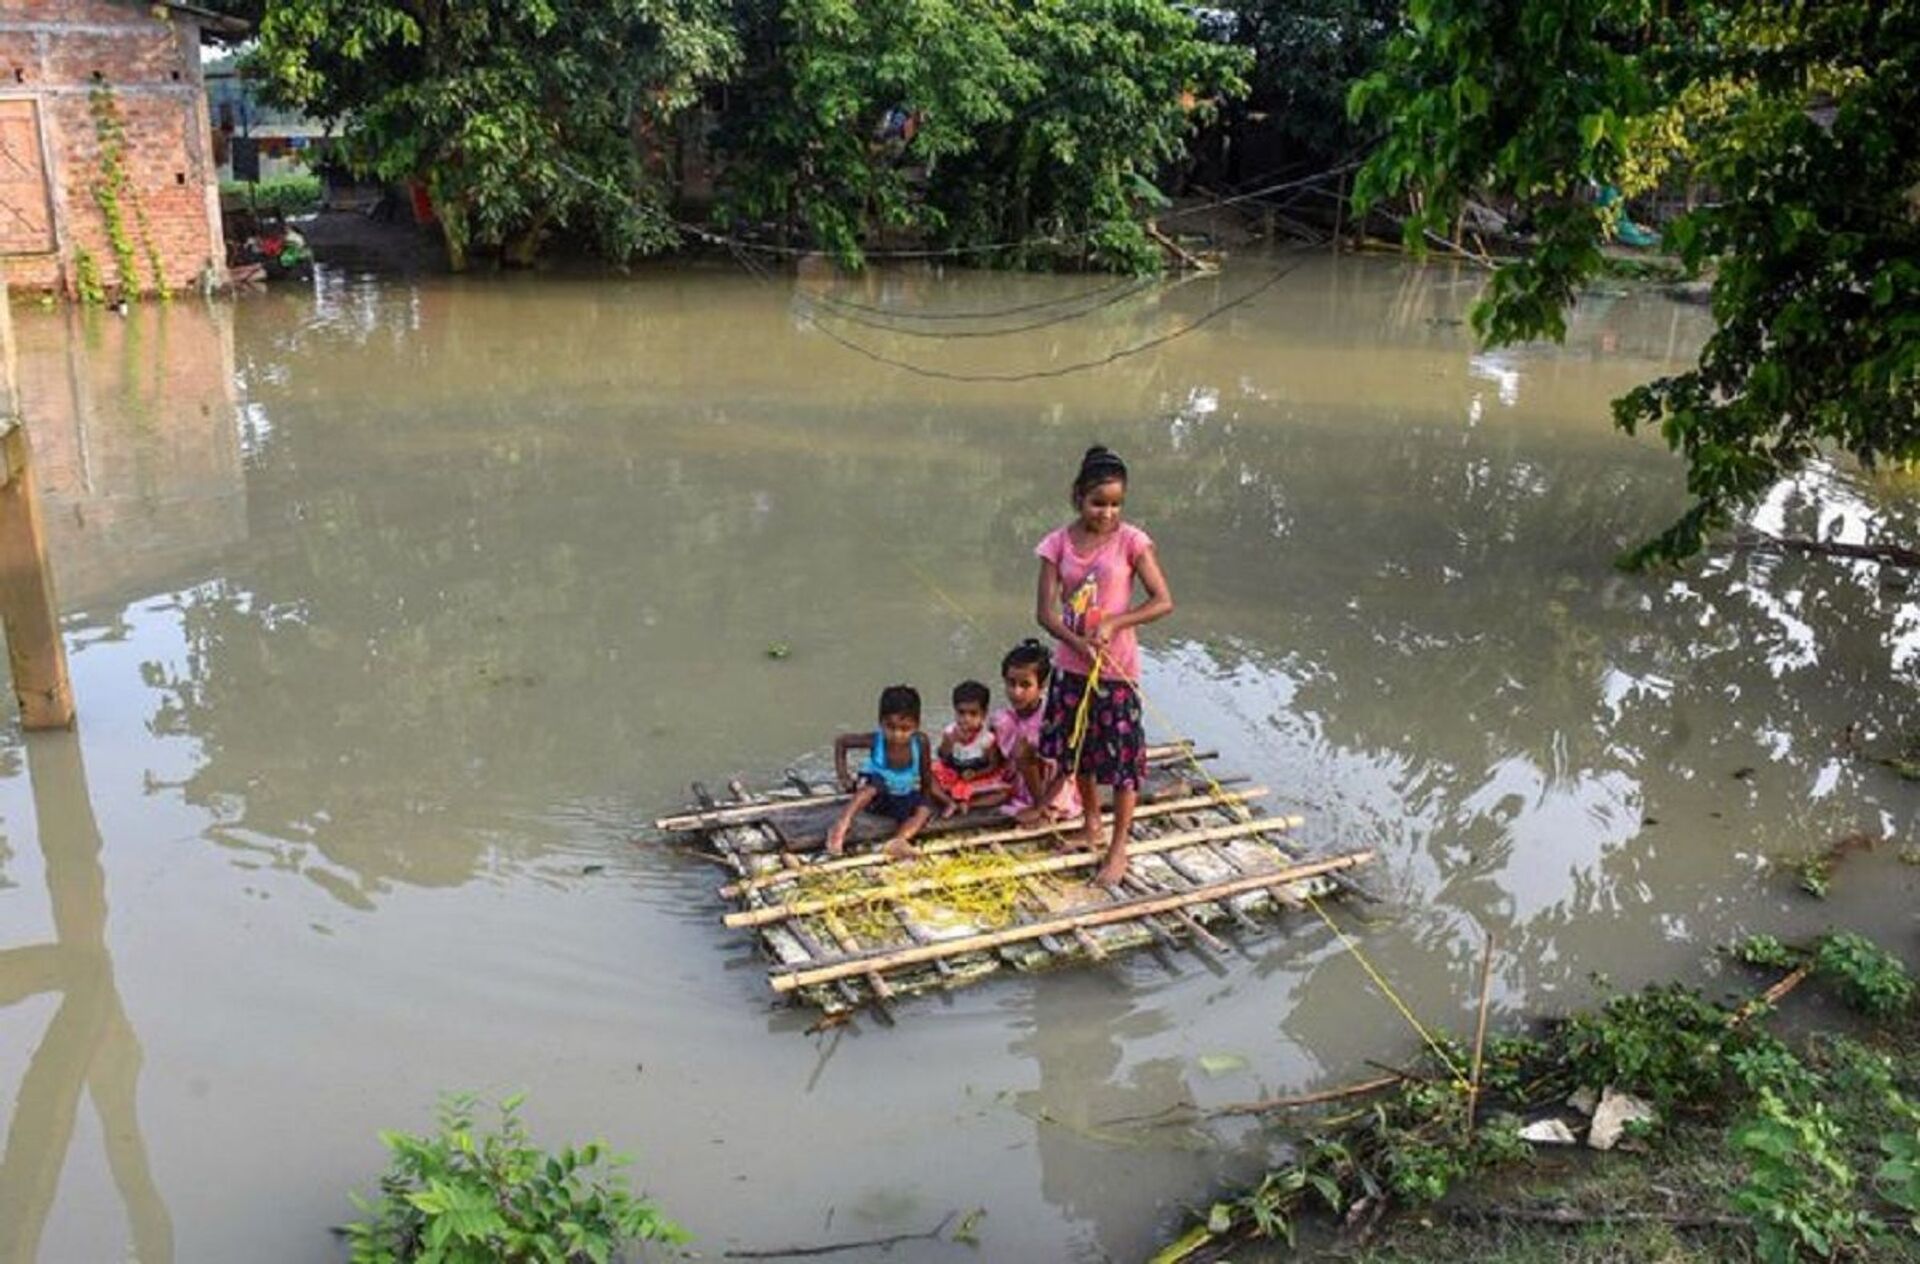 Over 9 Lakh affected in 23 districts as flood situation worsens - Sputnik International, 1920, 07.09.2021